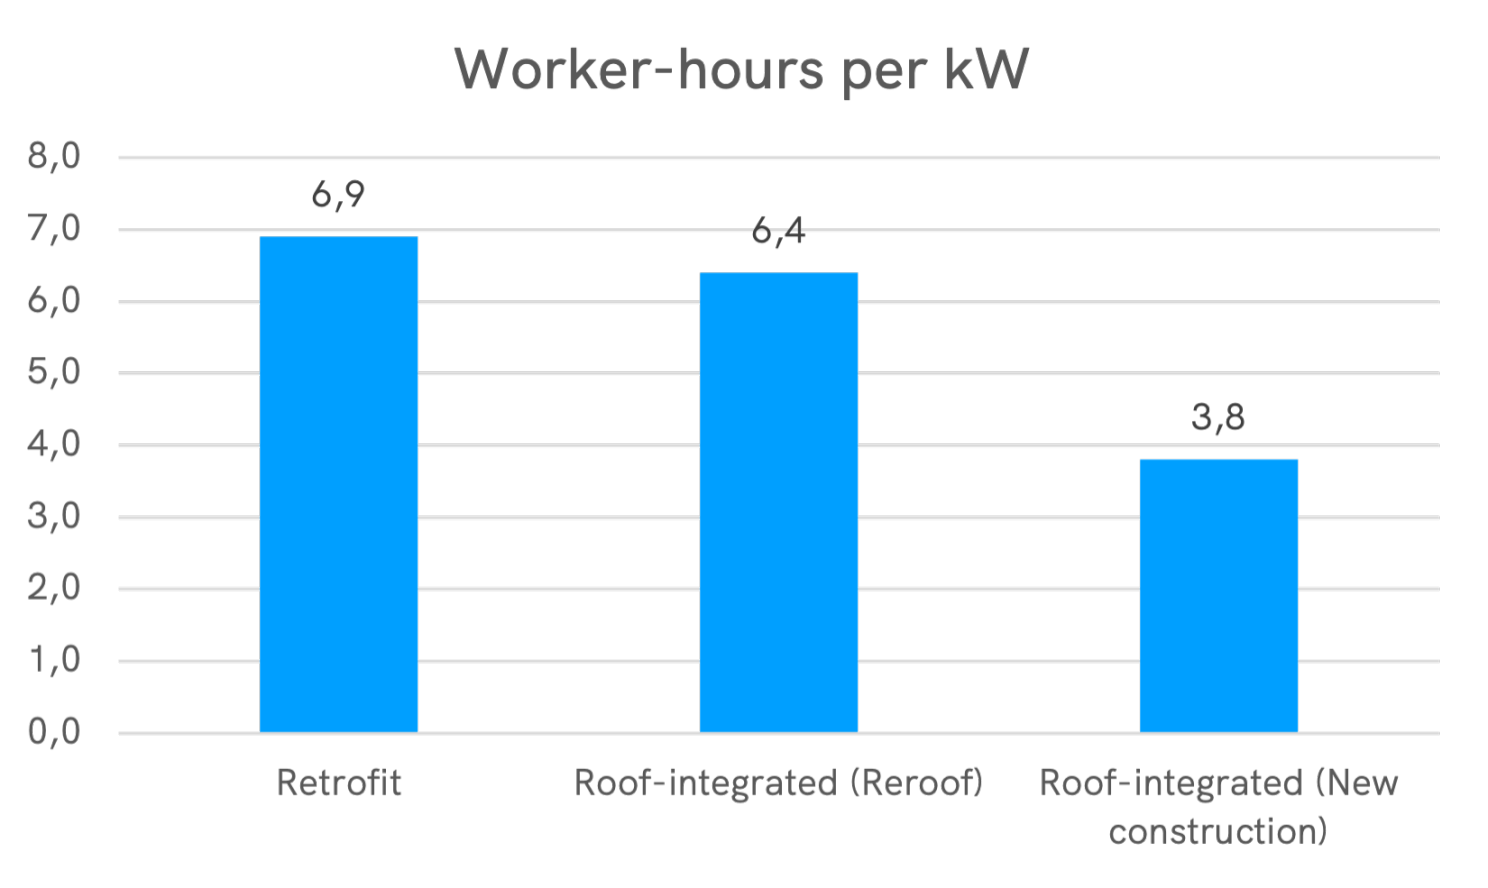 worker-hours per kw of solar panels installation